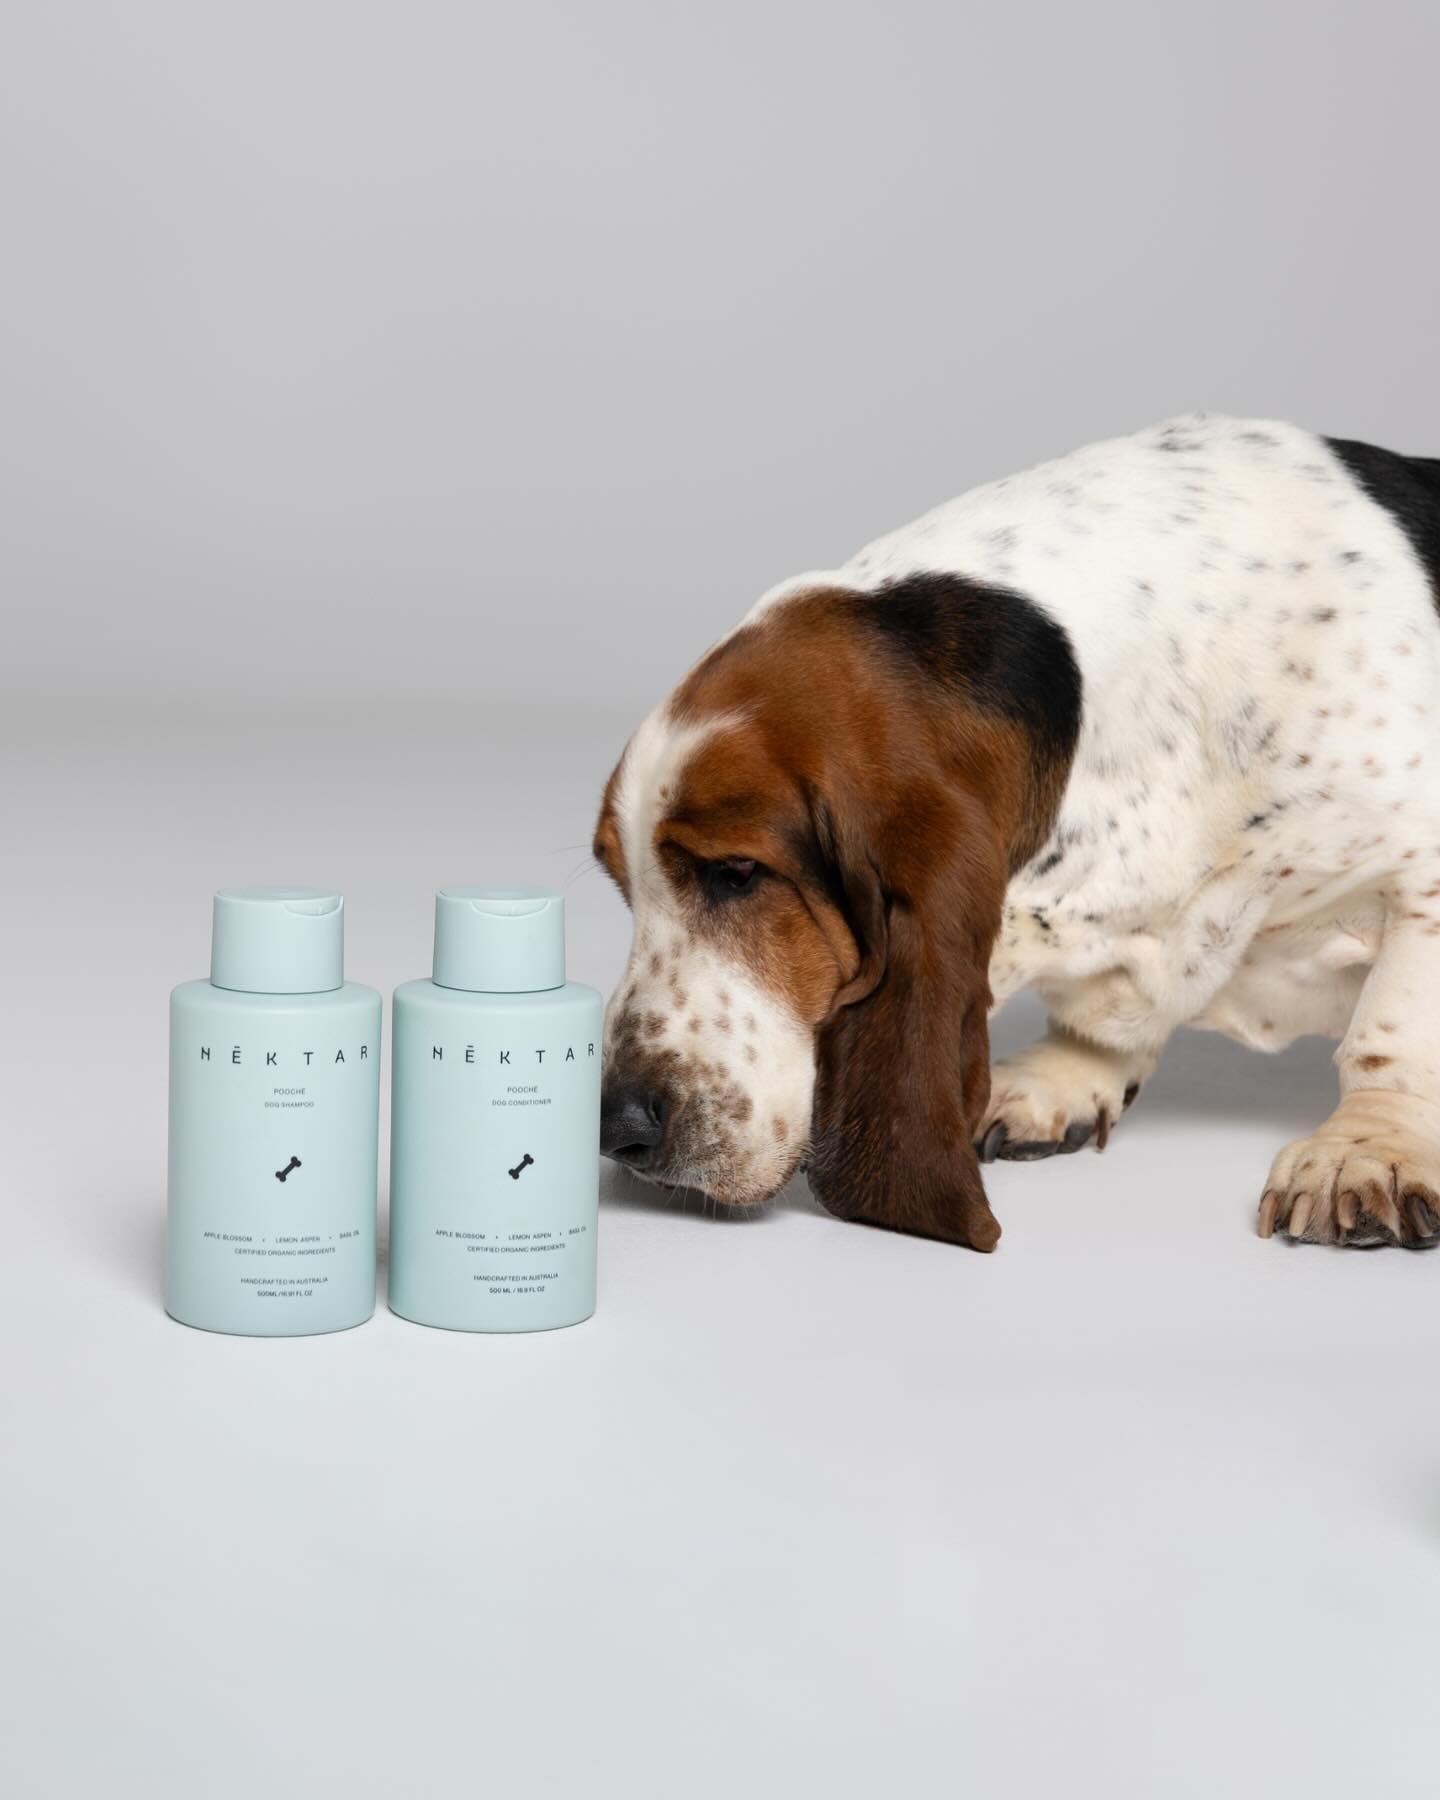 Cat (or should I say dog!) is out of the bag. 🐶🐶

Introducing Pooch&eacute;; where luxury meets the ultimate in canine care. Handcrafted in small batches in Australia with artisanal production, and utilising only the finest organic ingredients and 